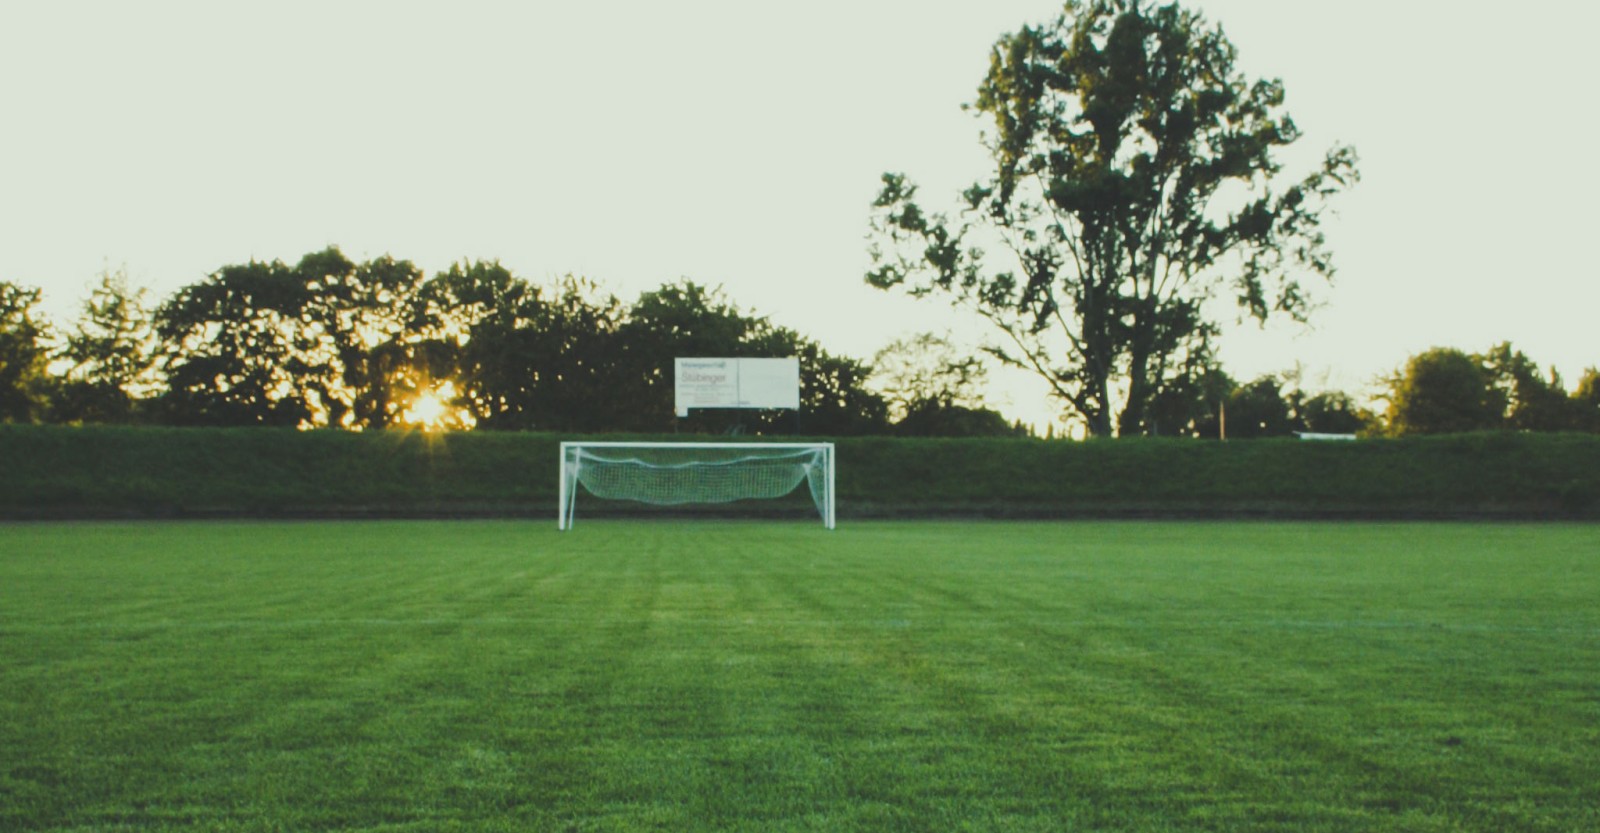 Football field, goal and a background of trees